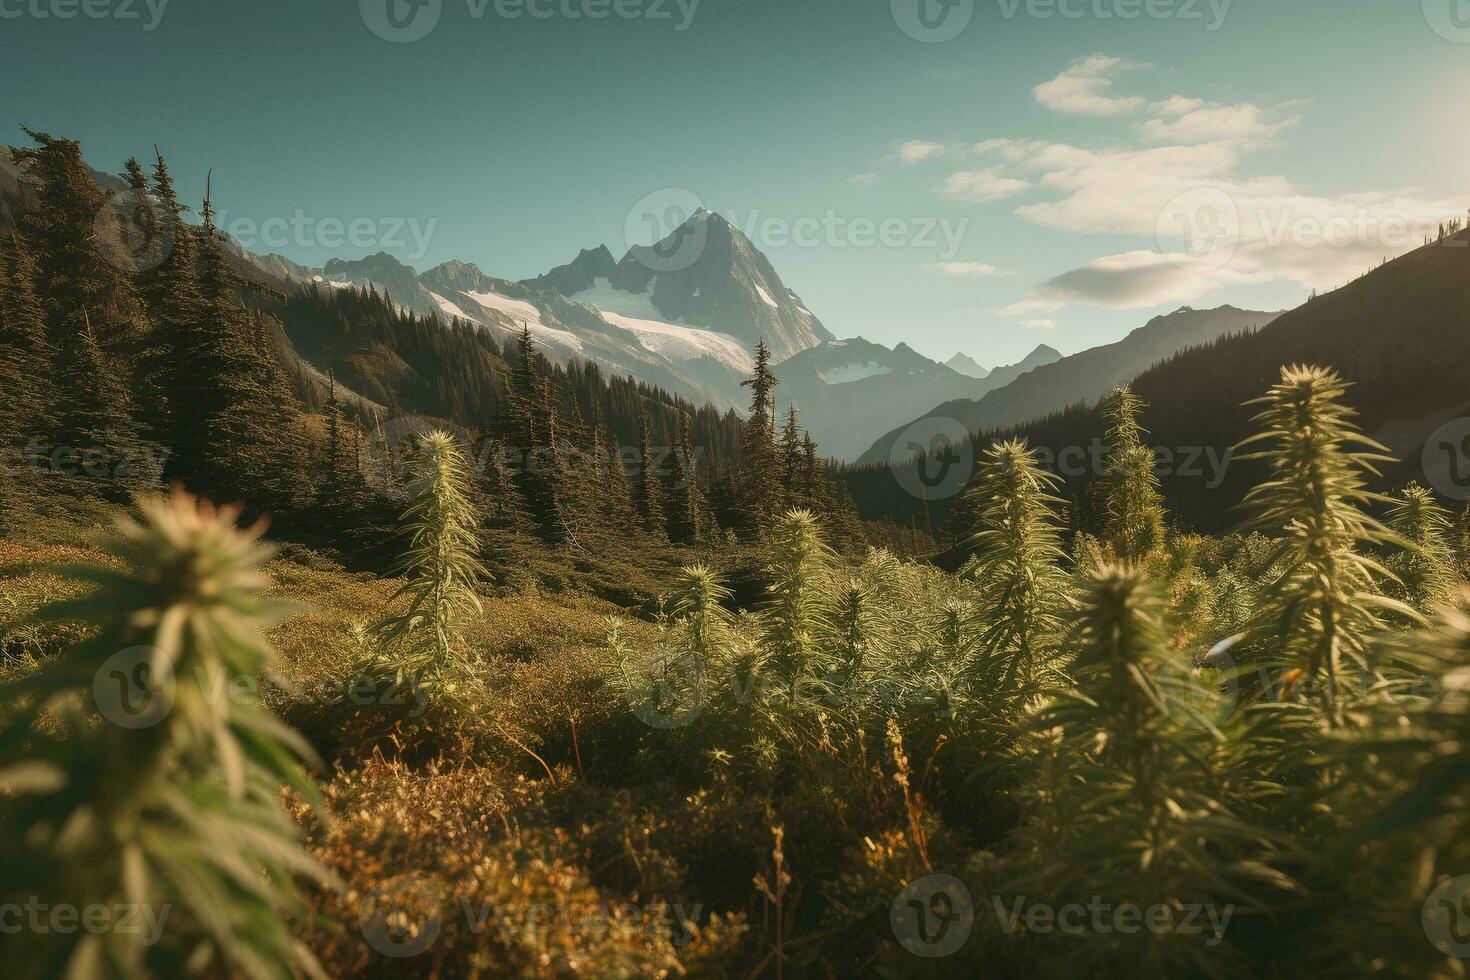 Stunning landscape photos featuring cannabis plants. Fields of cannabis plants with mountains in the background. These images be used to showcase the beauty of cannabis cultivation. Generative AI